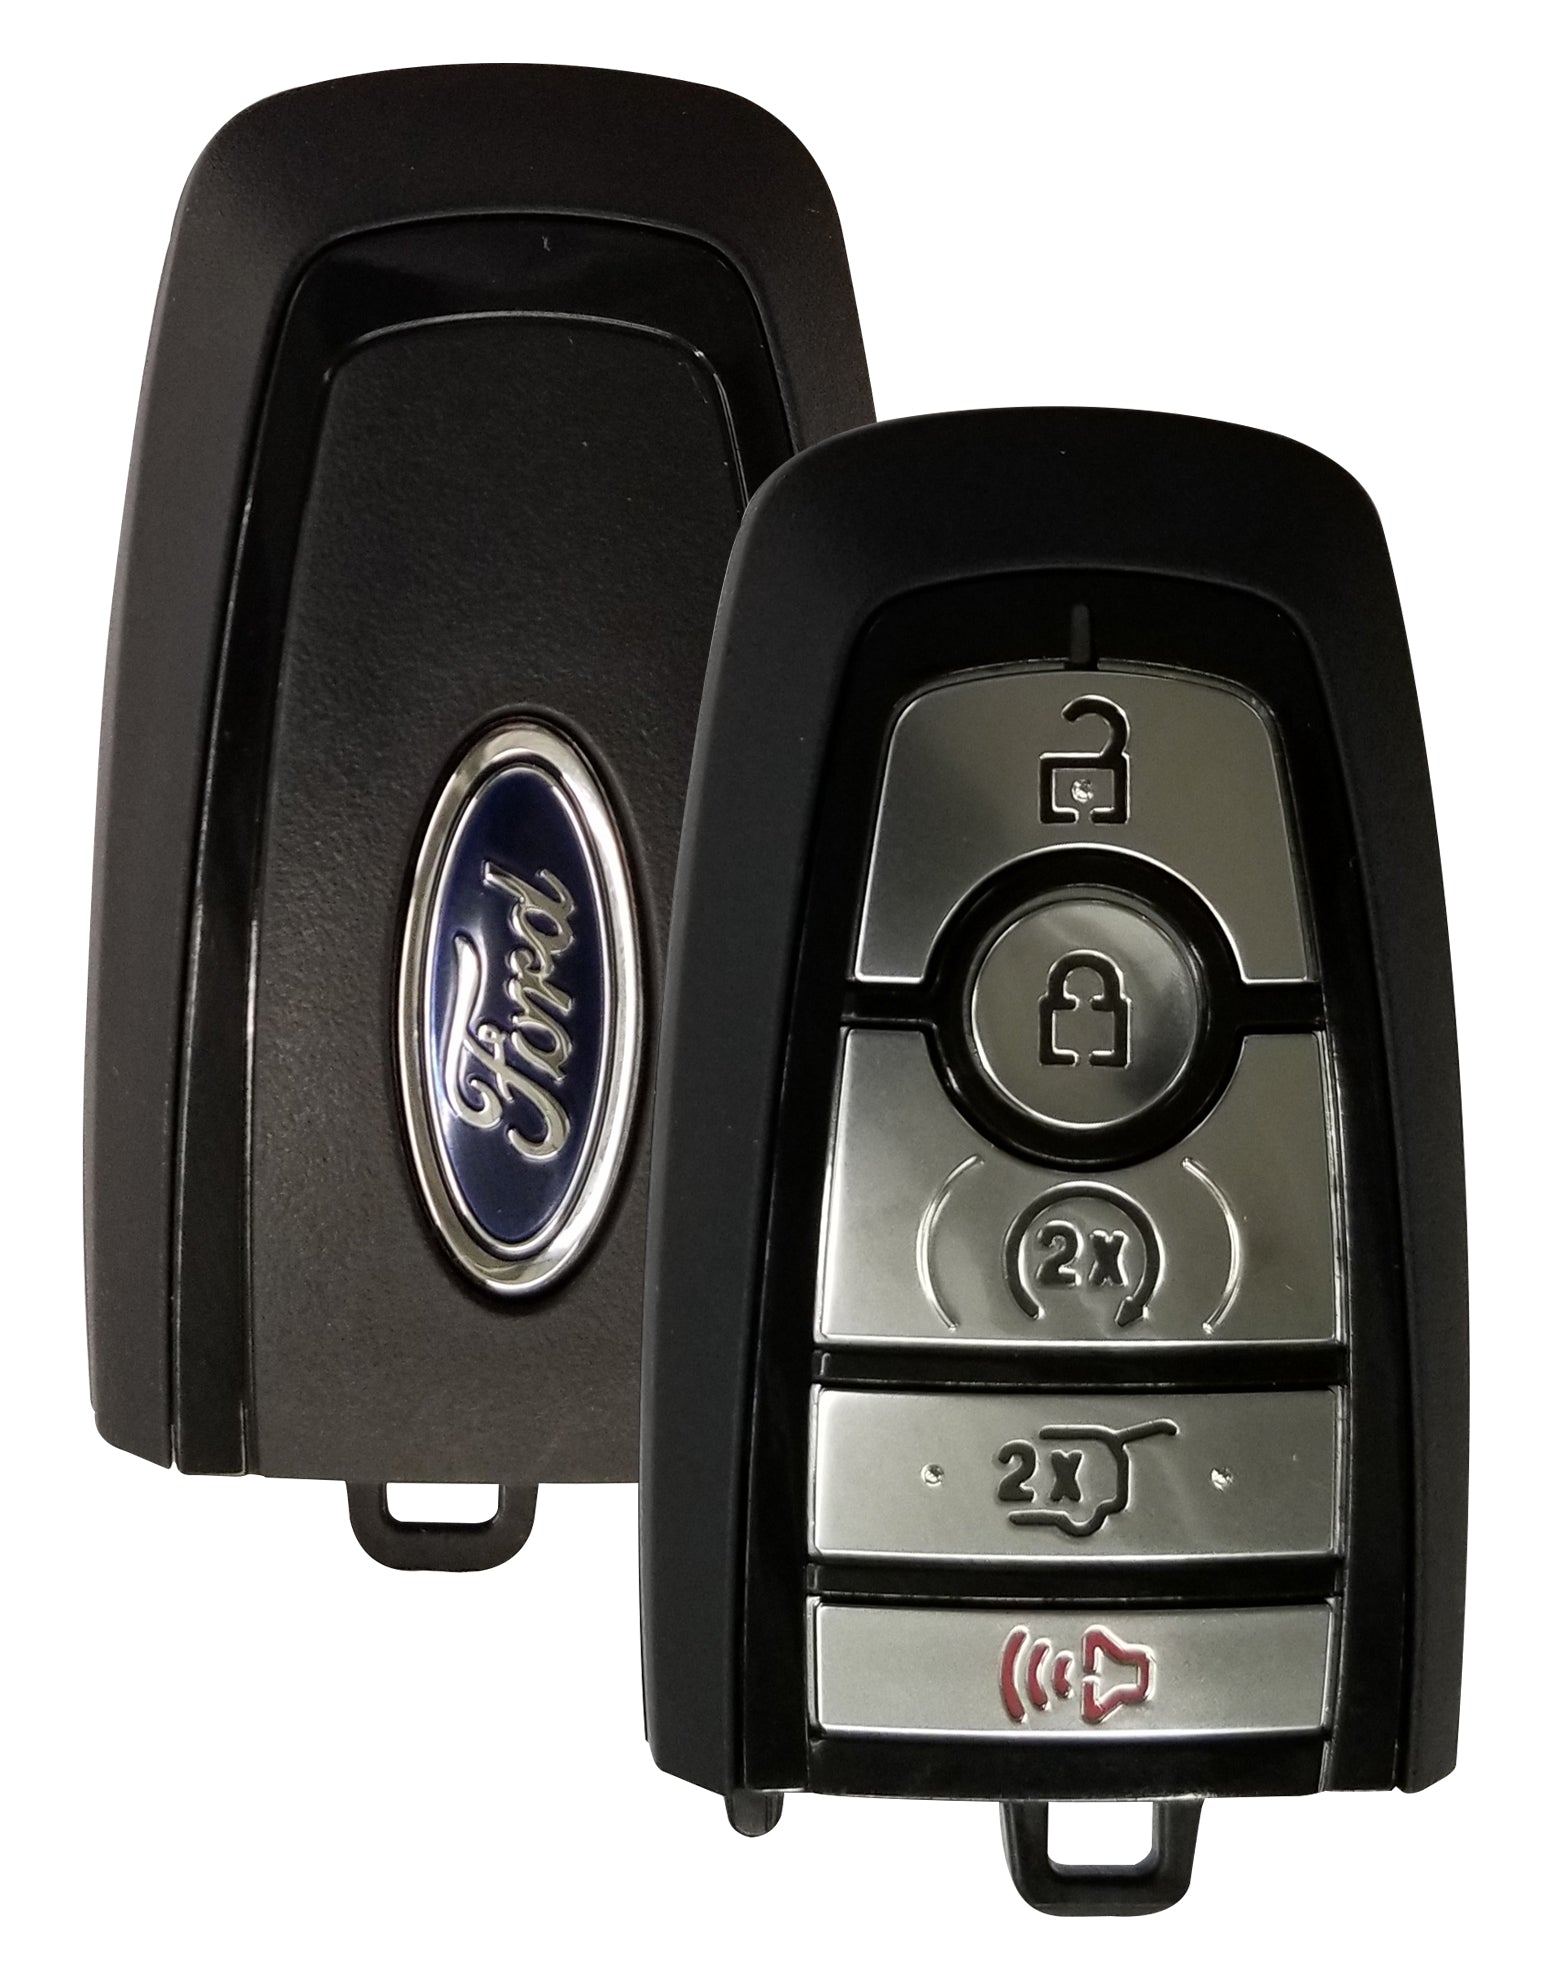 2022+ Ford Edge, Explorer & Expedition "Ford" Logo - Strattec 5943669 - 5 Button (902 MHz) GEN 5 PROX - With MST